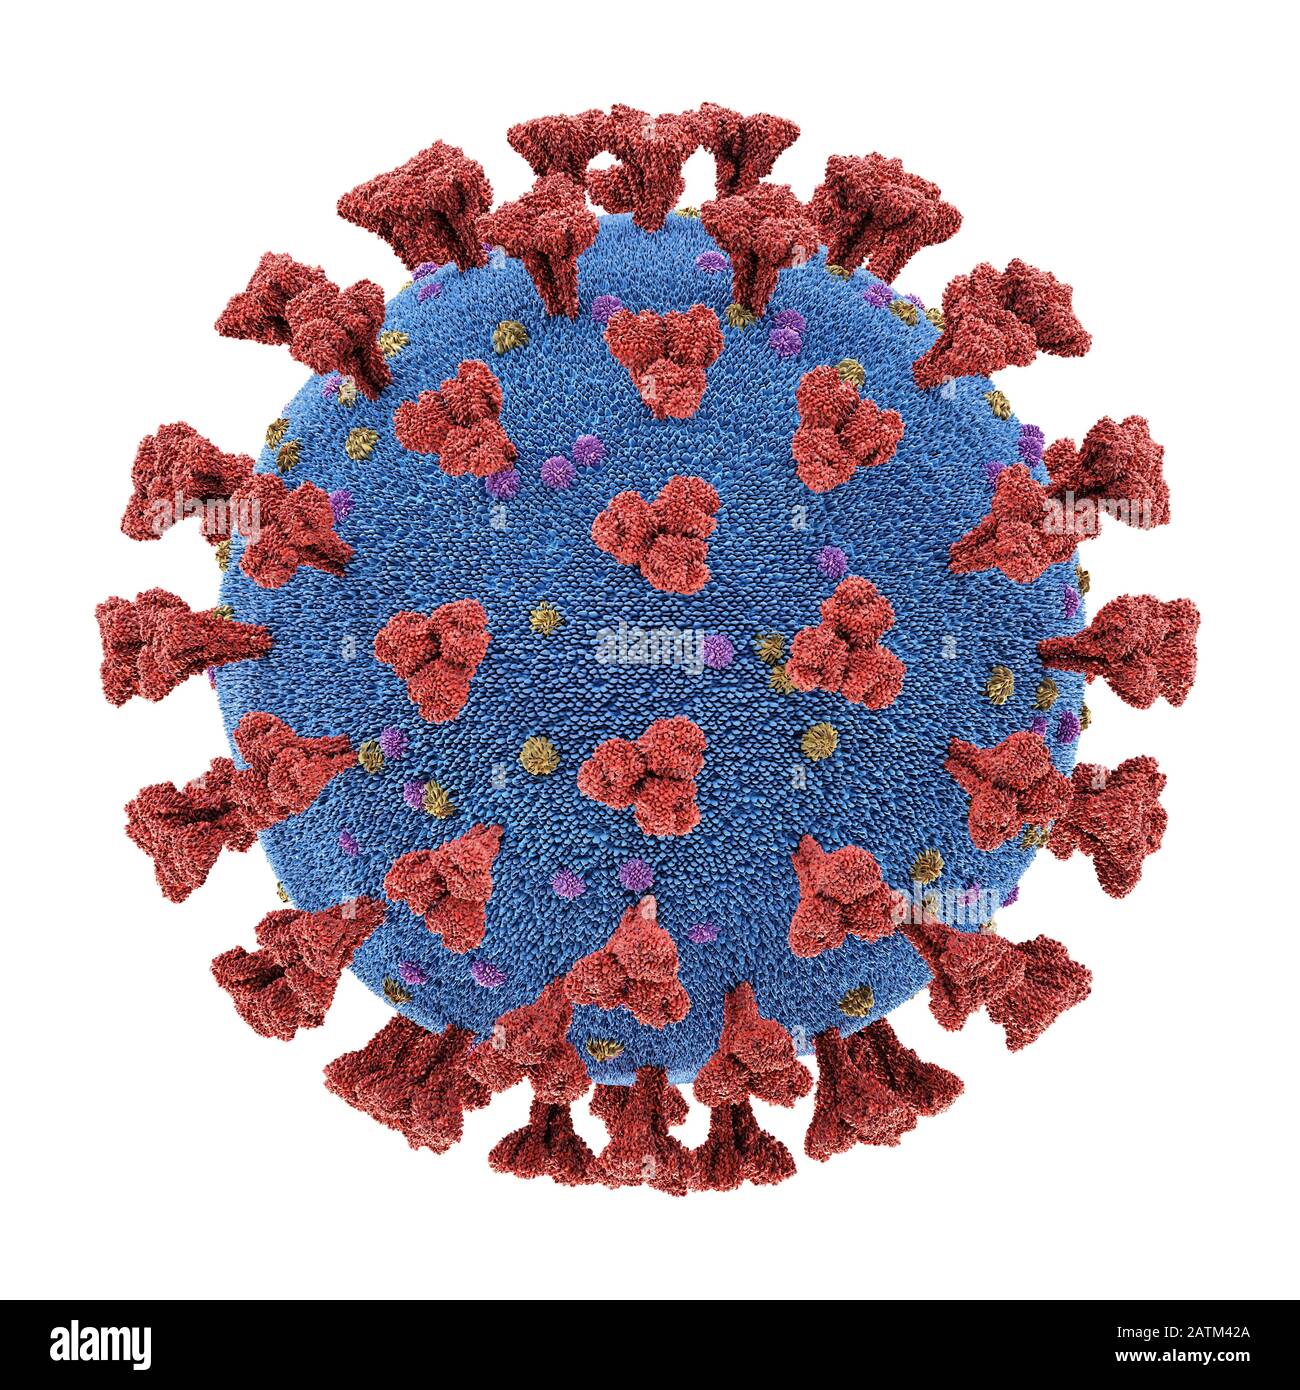 Coronavirus, group of viruses that cause diseases in mammals and birds. In humans, the virus causes respiratory infections. 3D illustration, conceptua Stock Photo